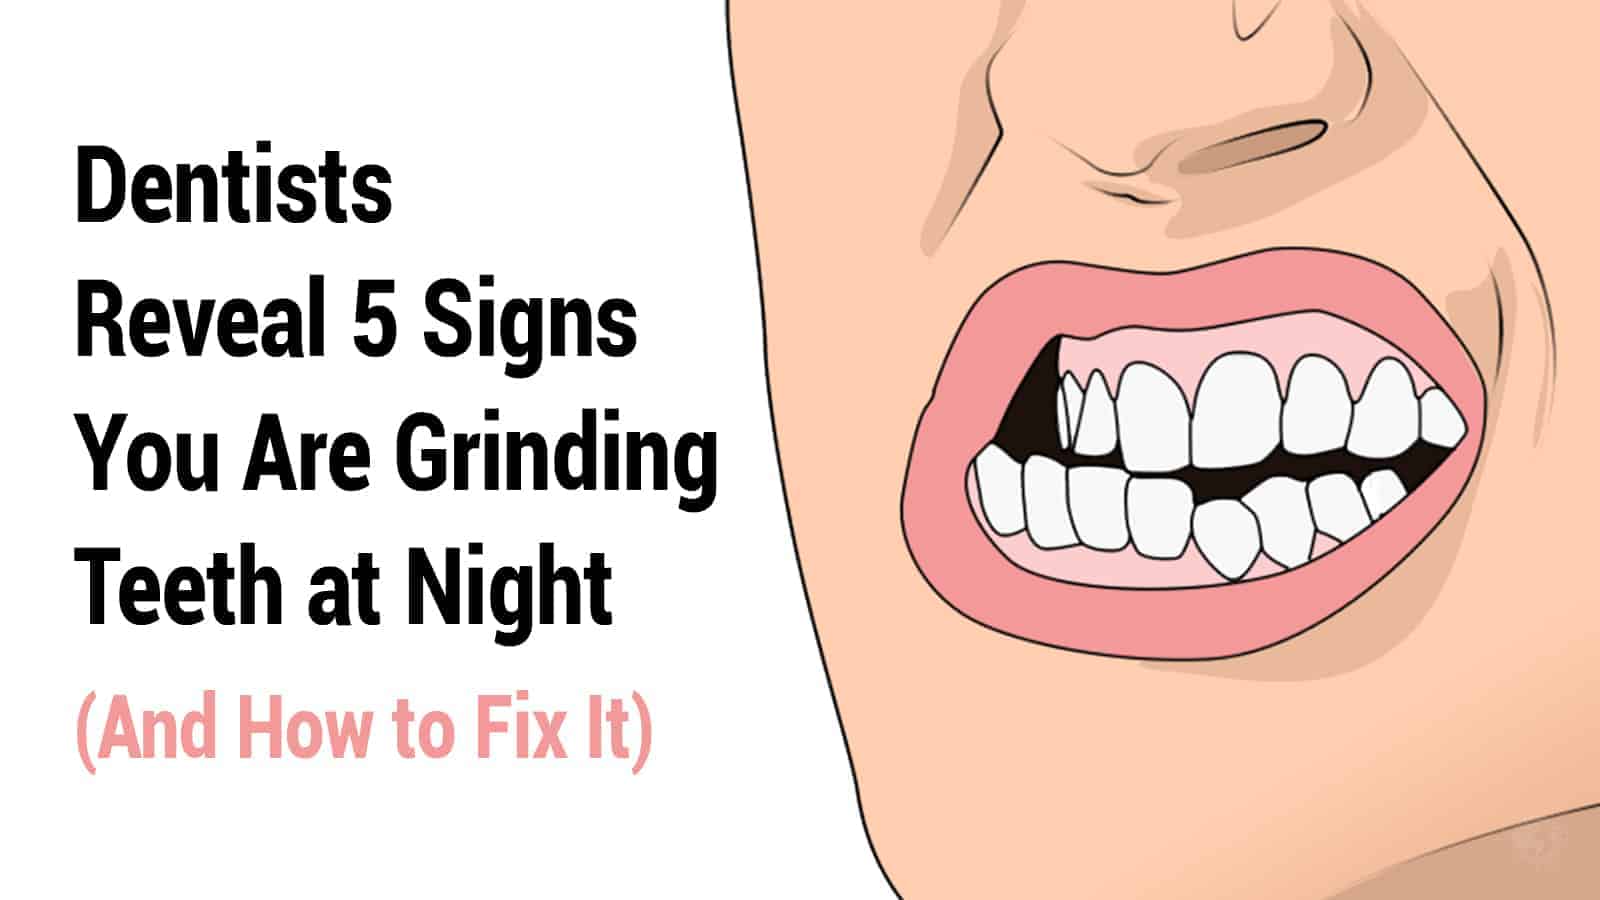 Dentists Reveal 5 Signs You Are Grinding Teeth at Night (And How to Fix It)